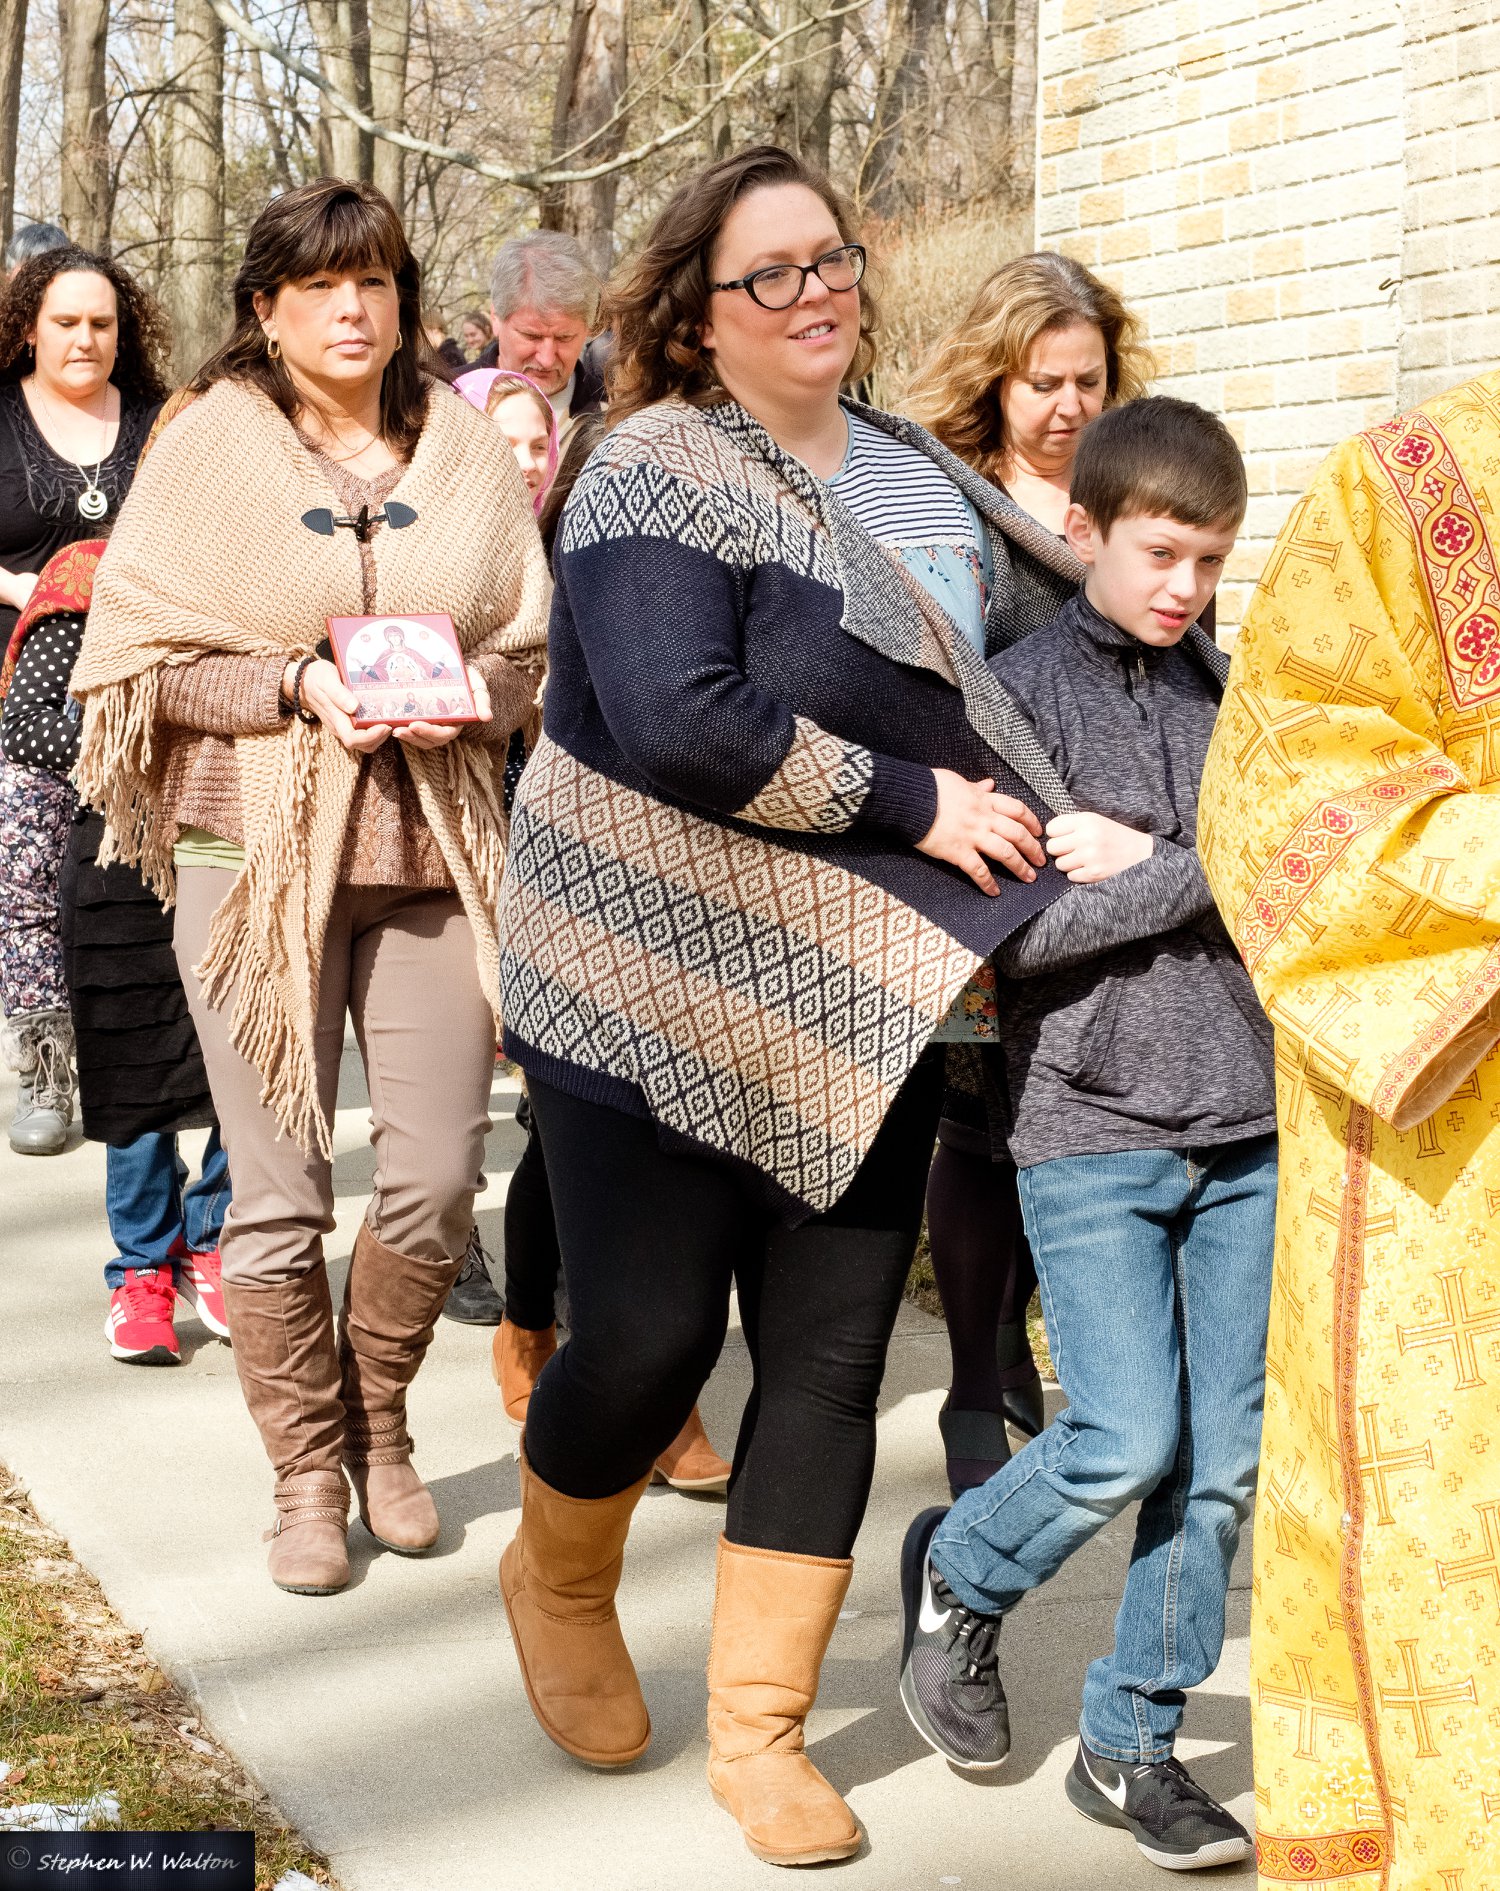  parishioners in procession outside holding icons 